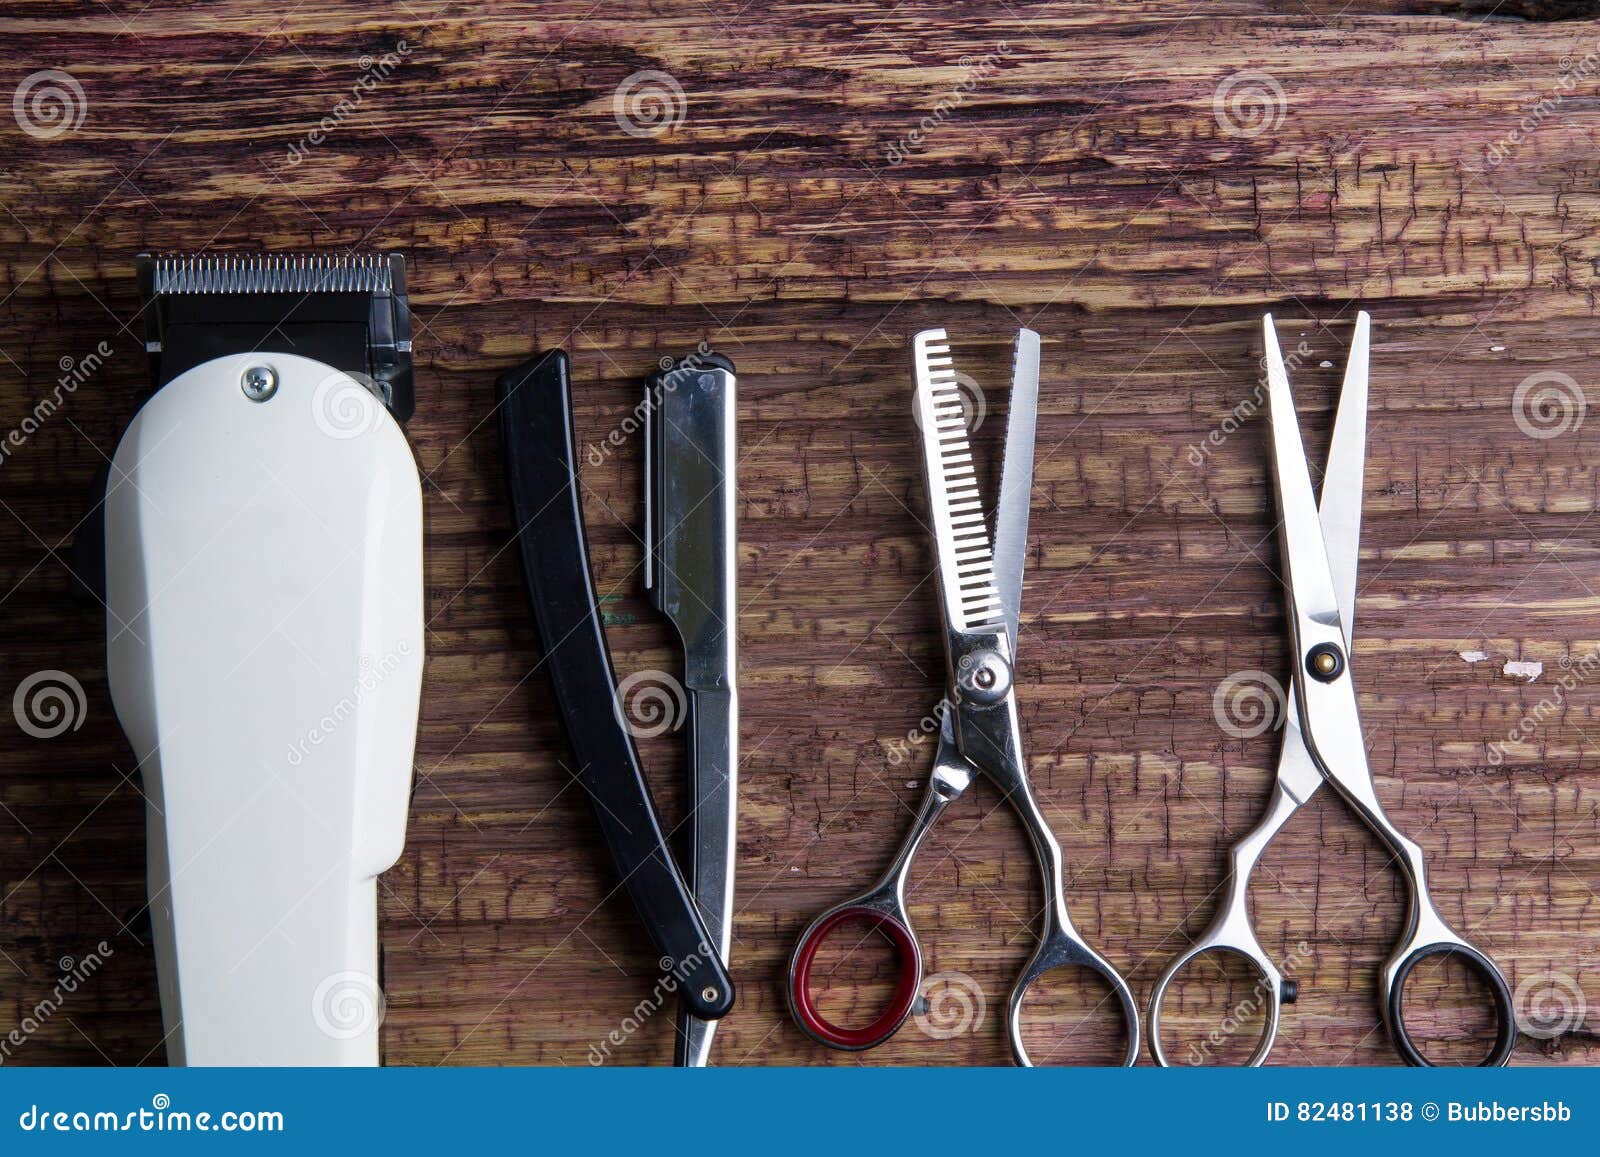 stylish professional barber clippers hair clippers hair sciss scissors razor haircut accessories wood background copy 82481138